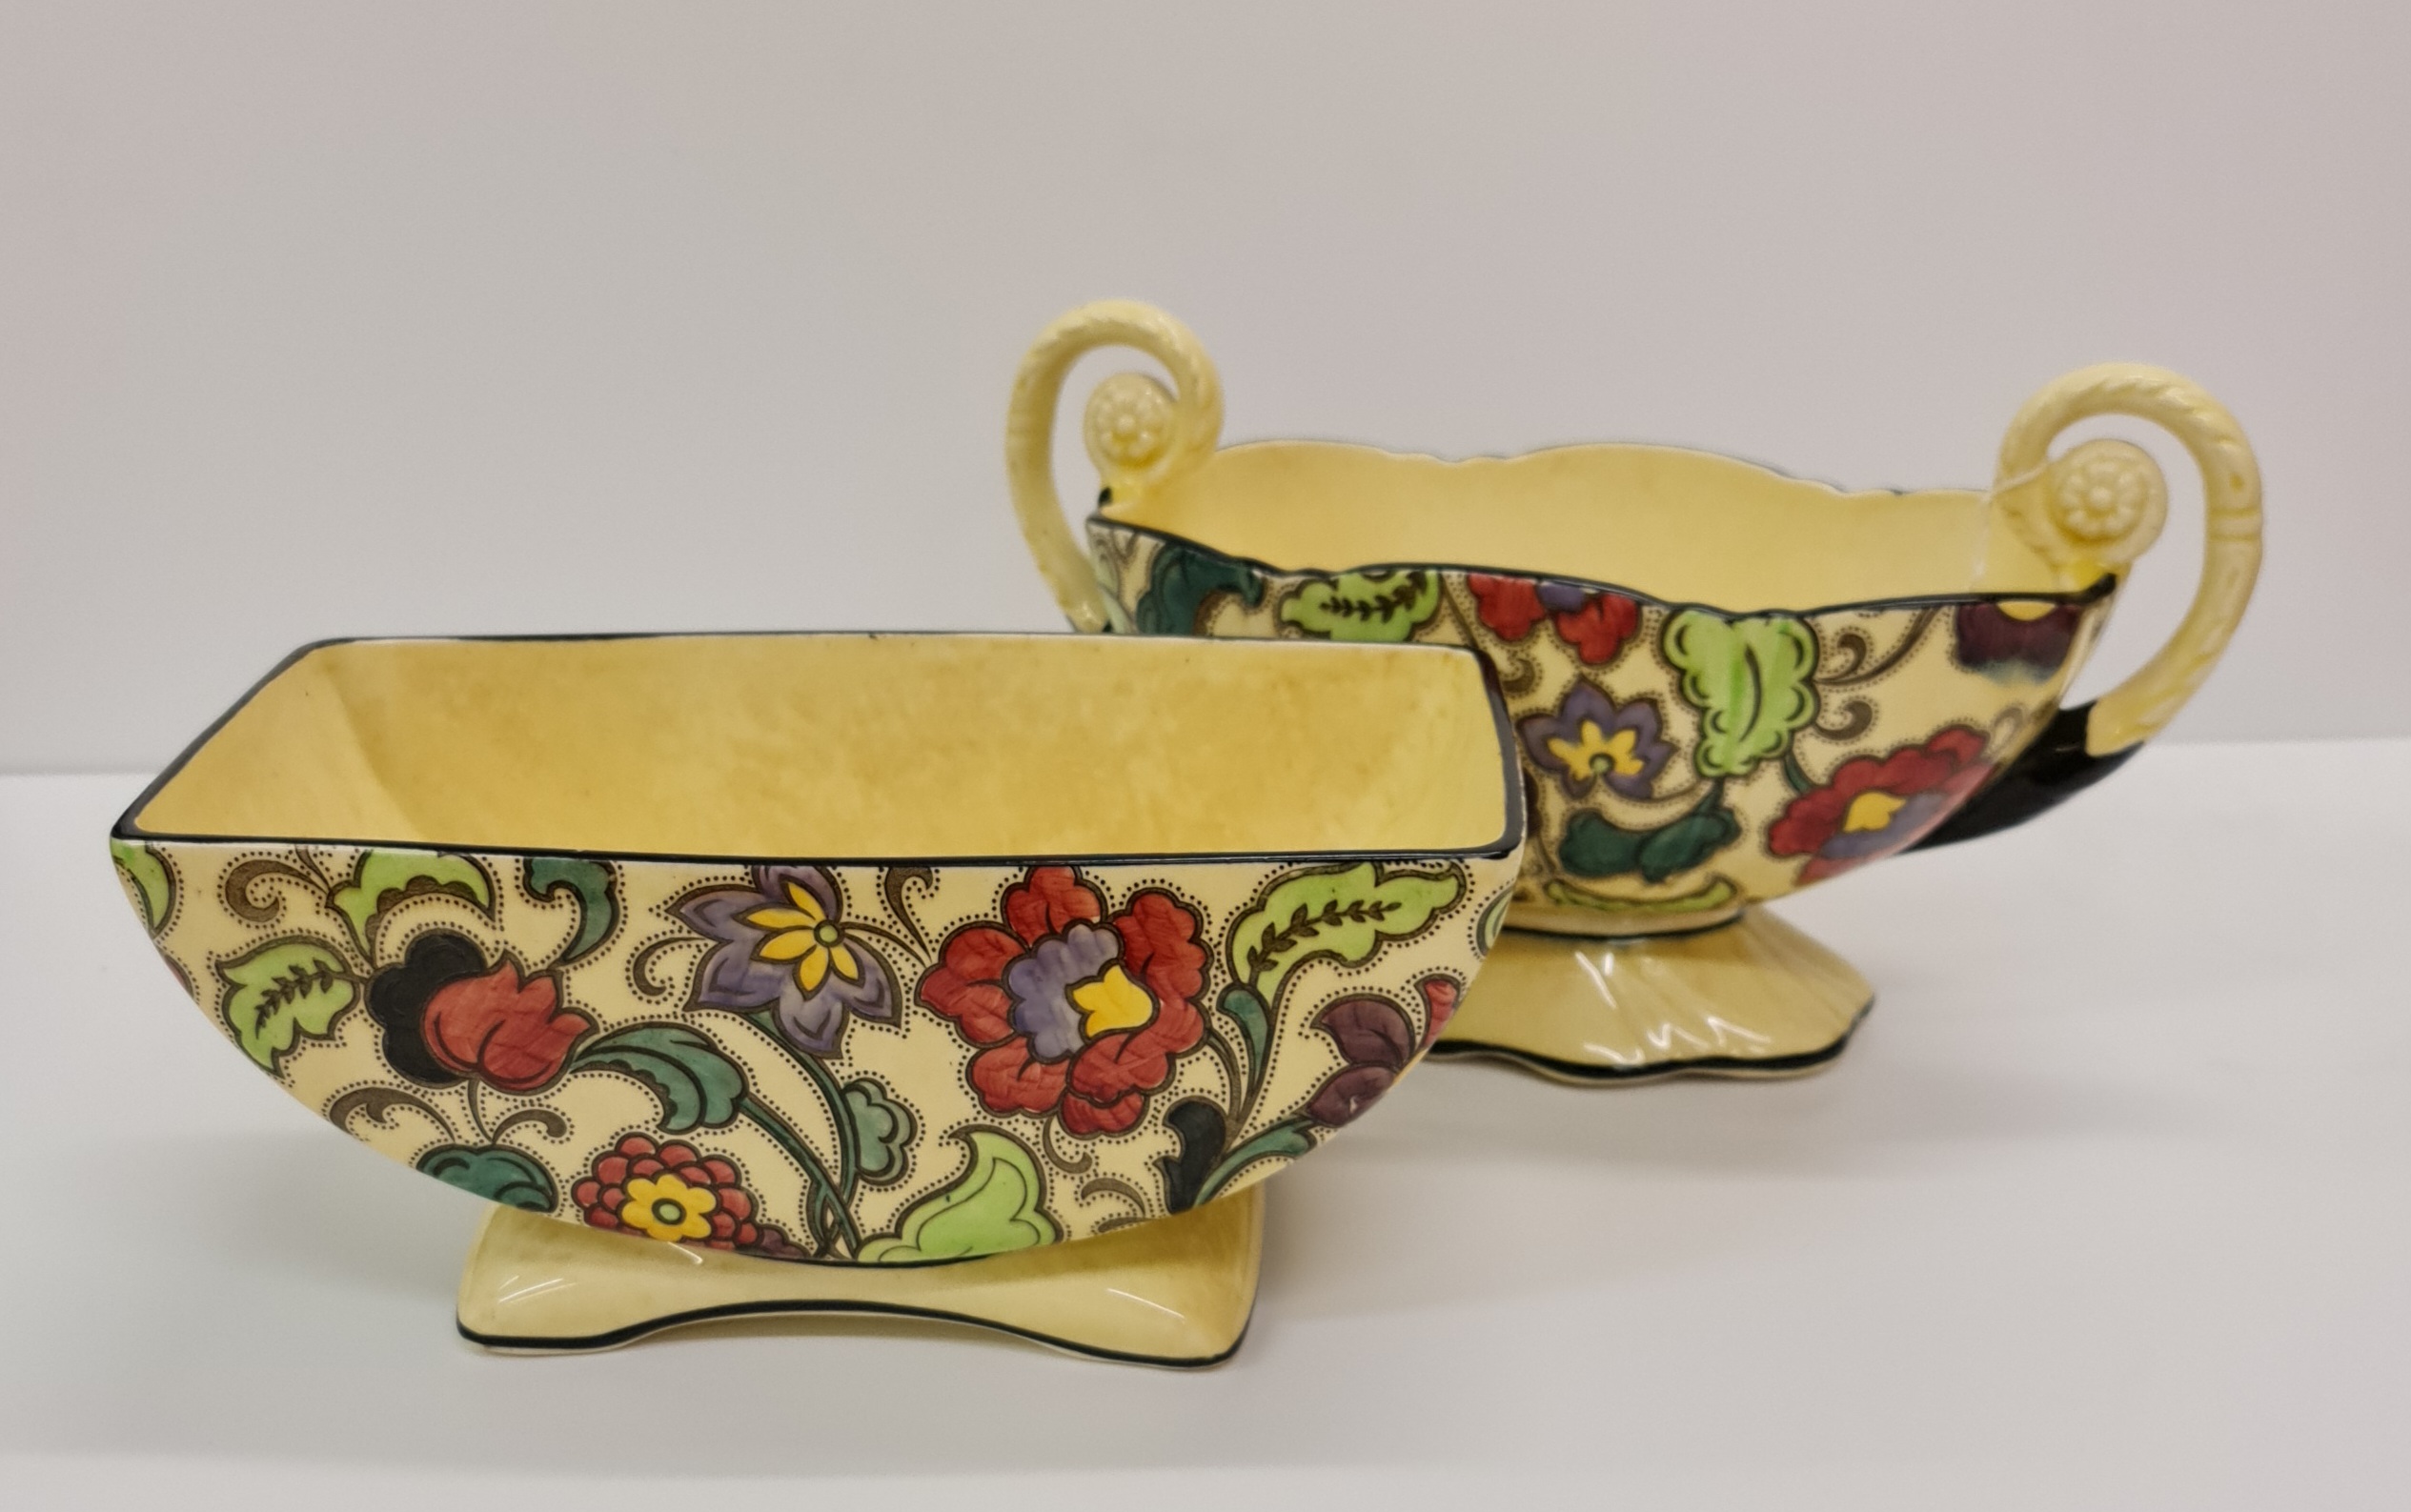 Two Tuscan Decorous pottery bowls one with handles hand painted flowers and leaf design.